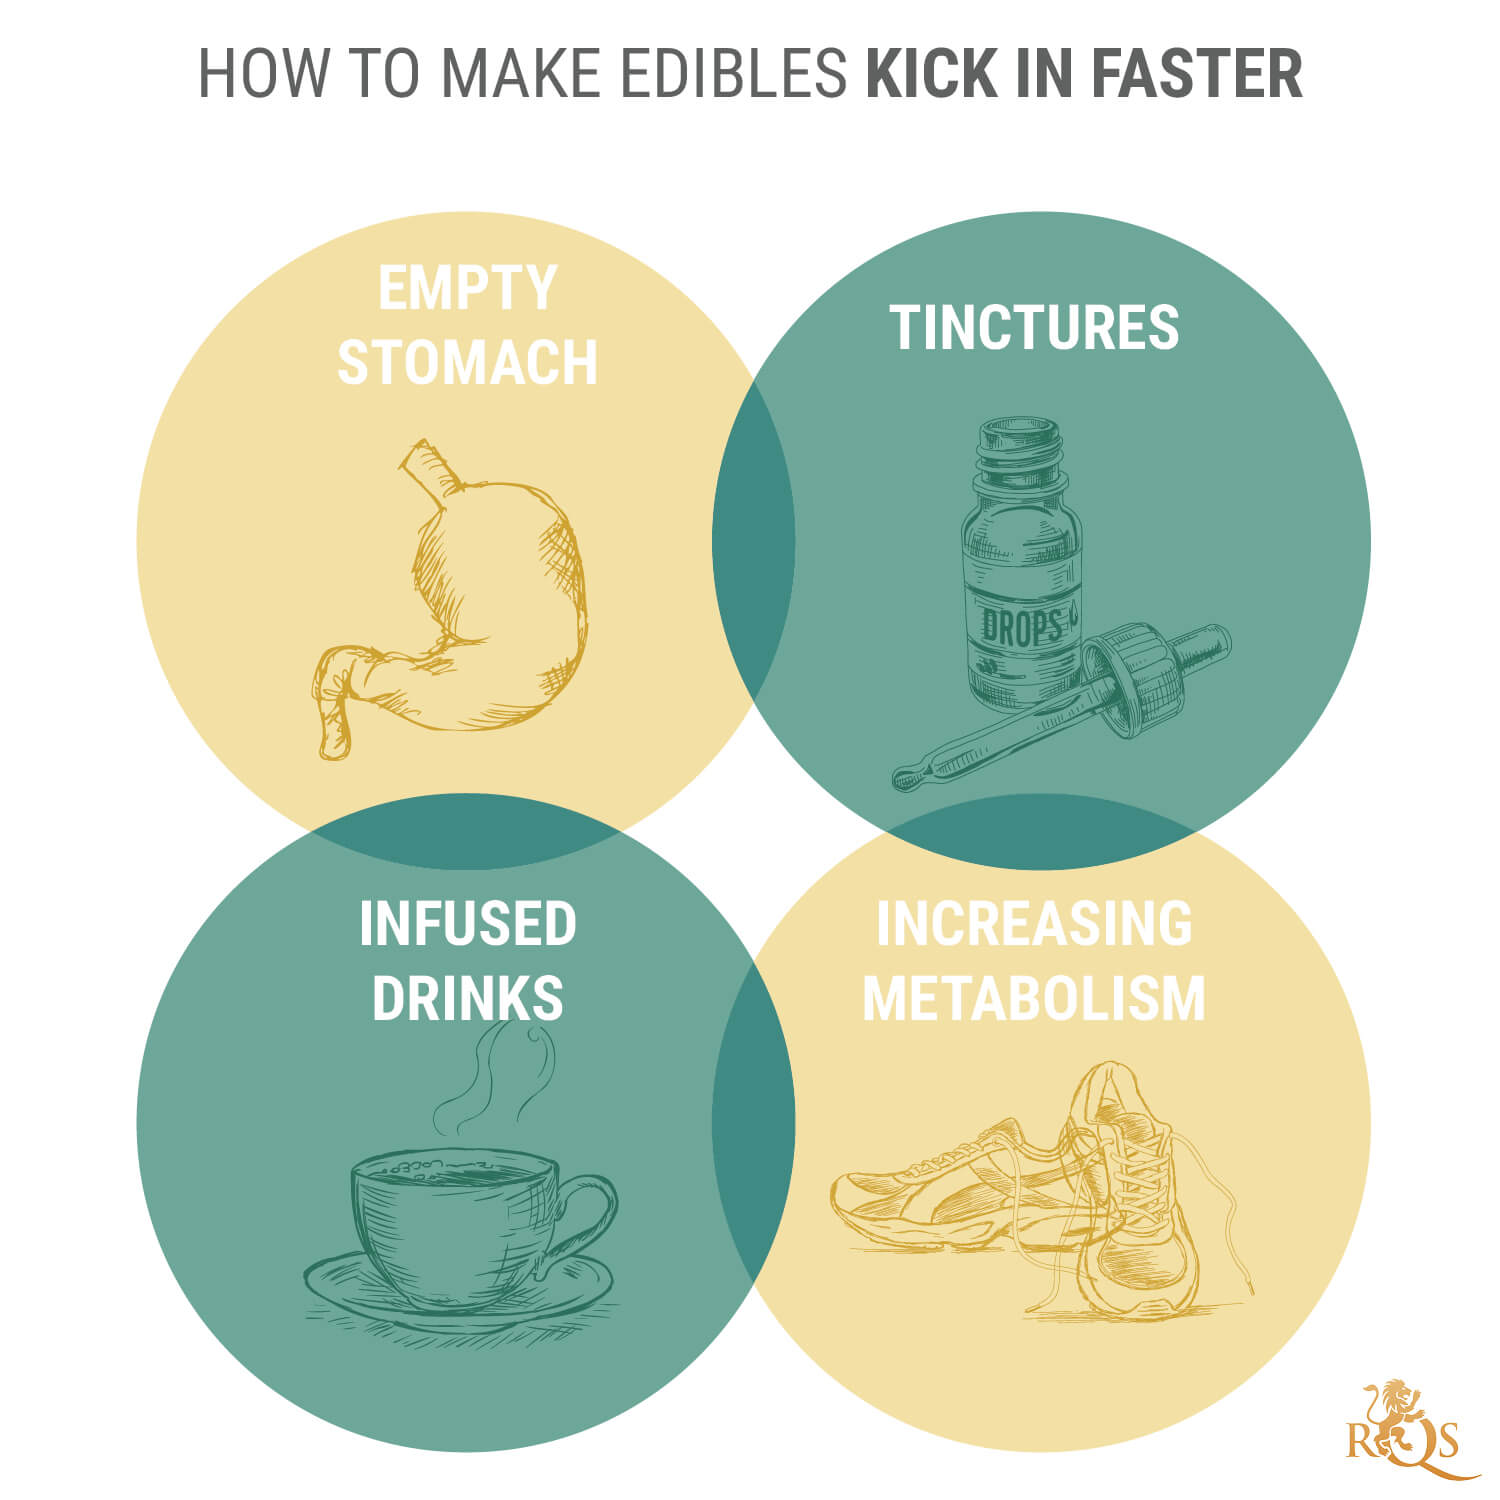 How to Make Edibles Kick in Faster